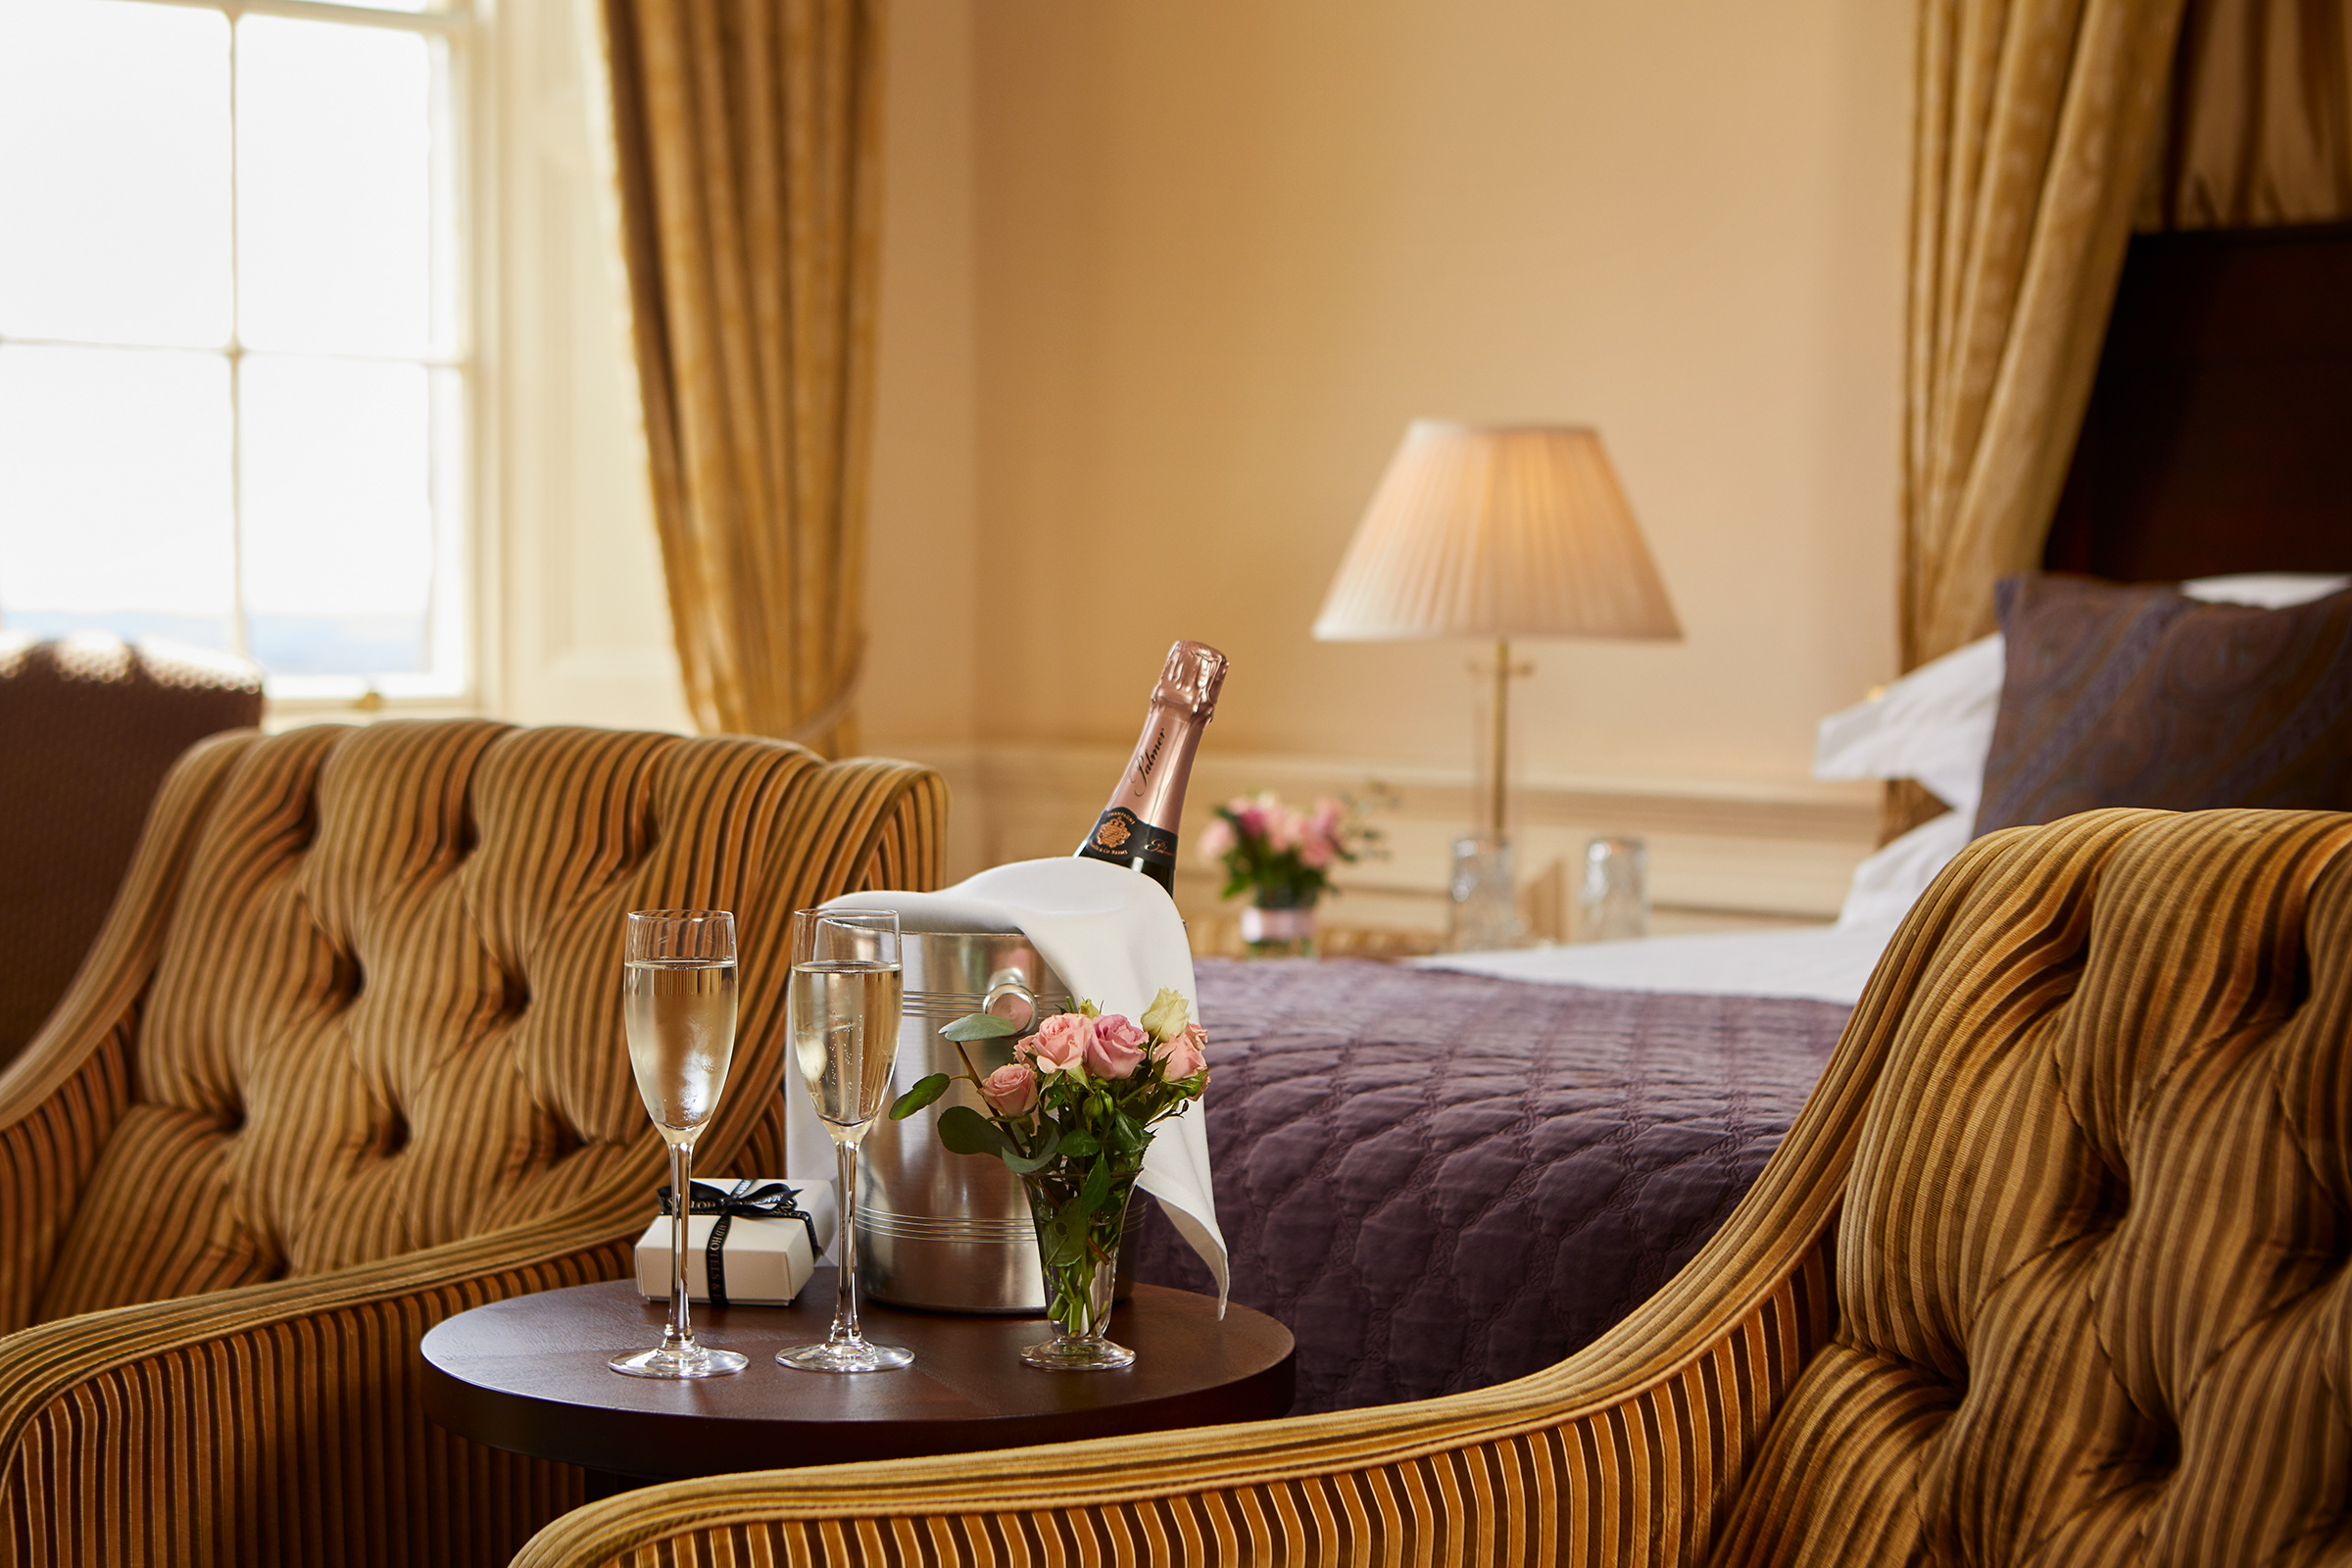 Bridal Suite & Champagne, Ansty Hall. Hospitality and restaurant photographer, Macdonald hotels